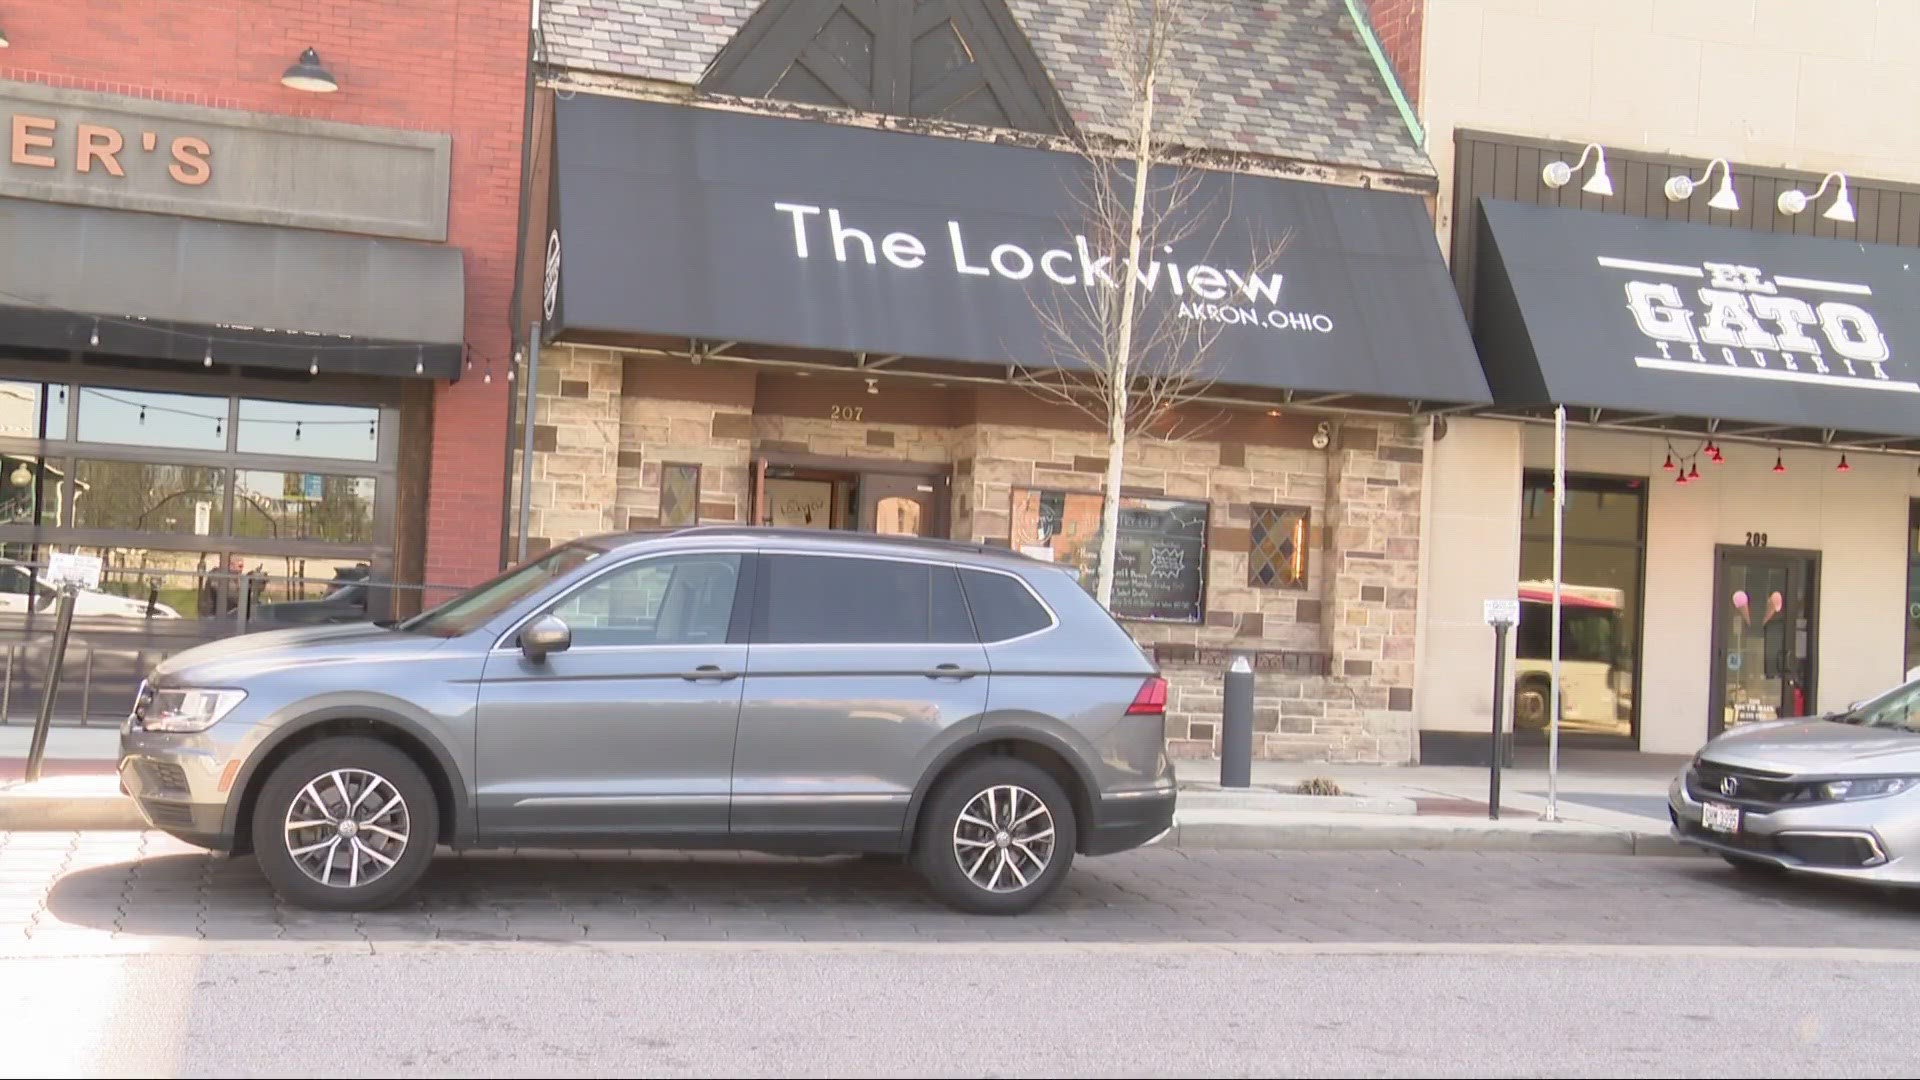 While many businesses on South Main Street remain closed, others are determined to keep their doors open.